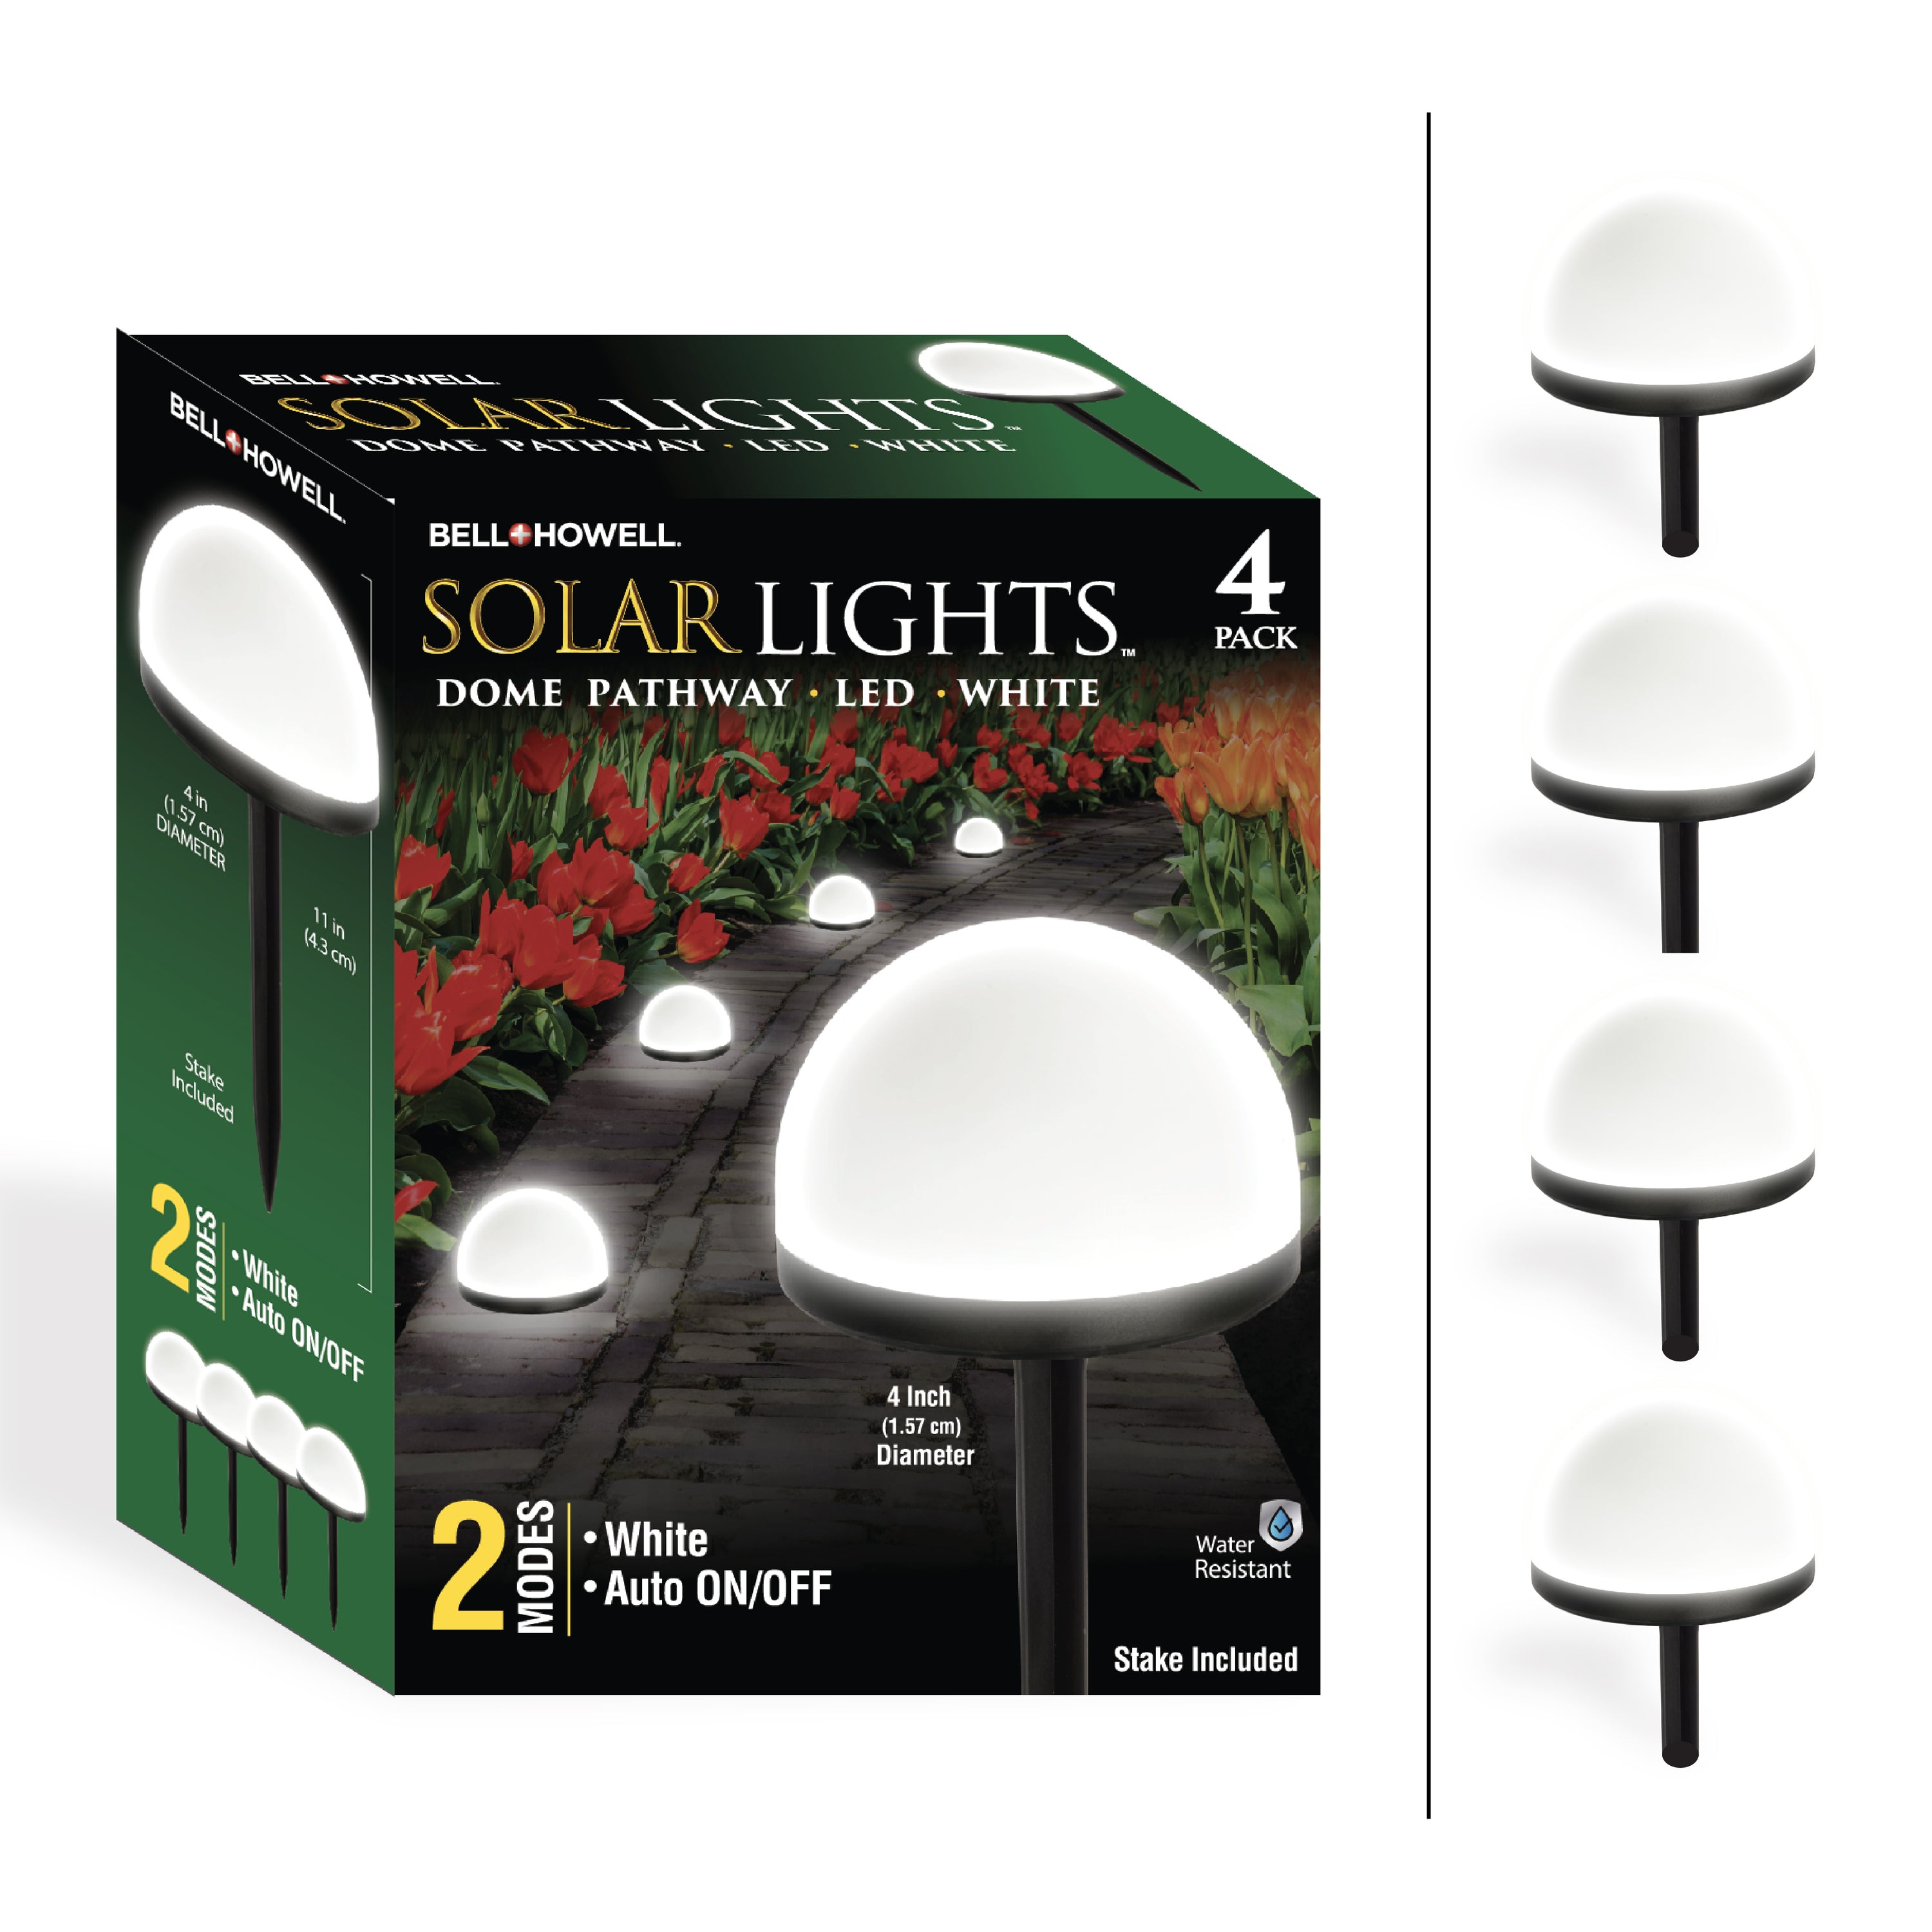 Bell + Howell Solar Pathway Dome Lights - 4 Pack